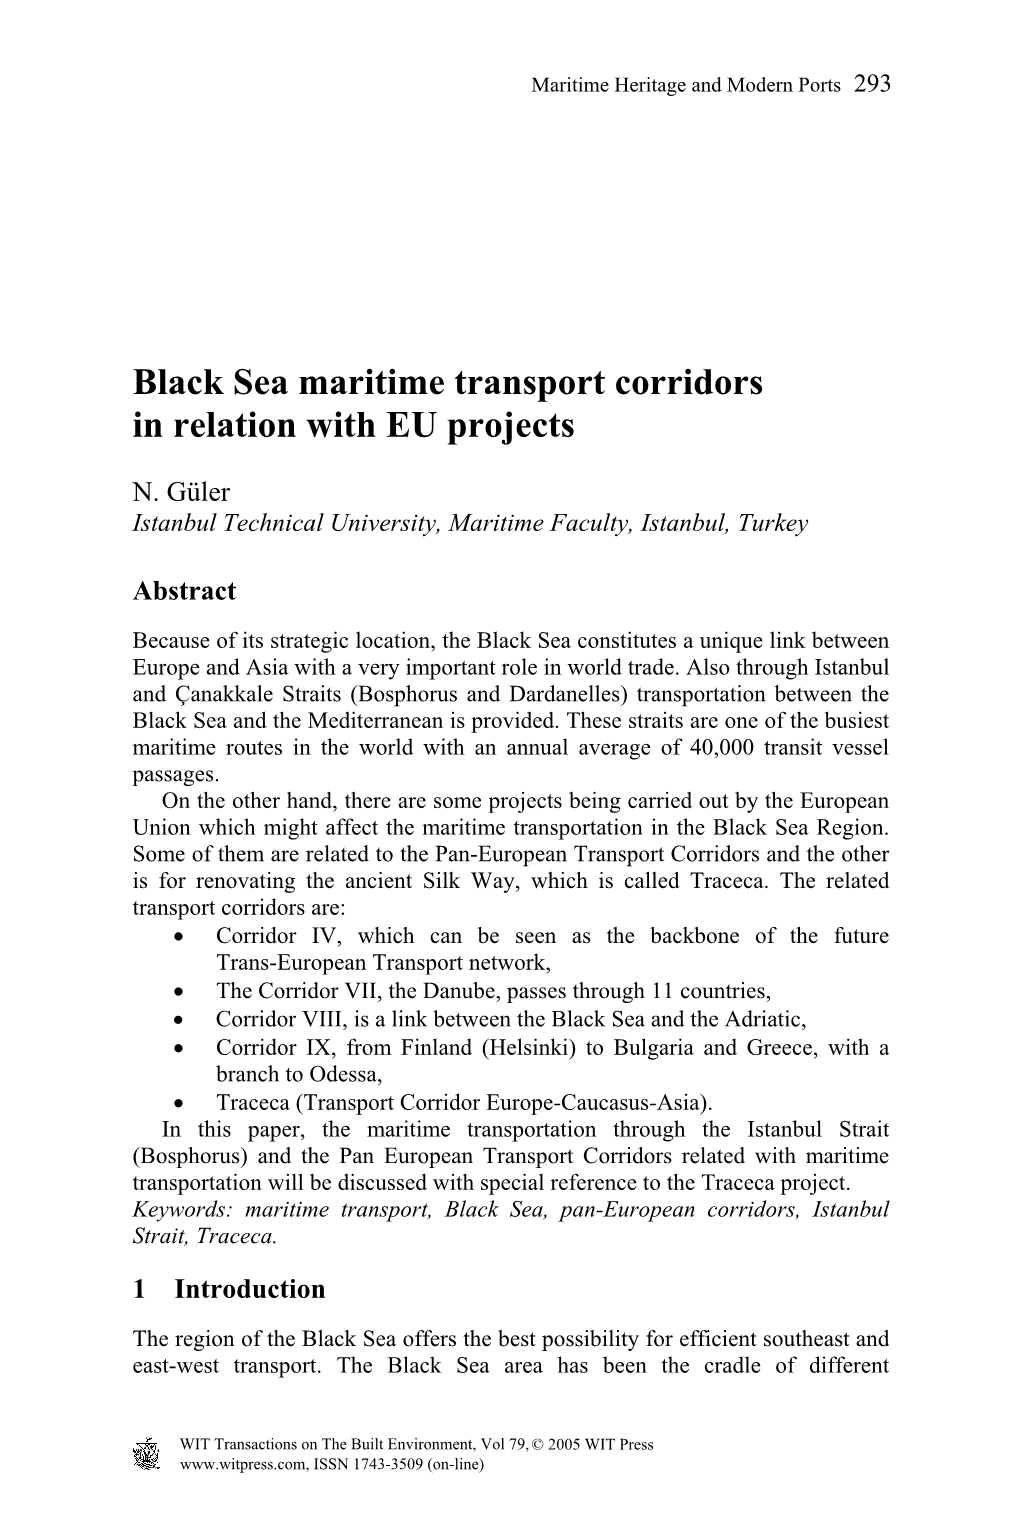 Black Sea Maritime Transport Corridors in Relation with EU Projects